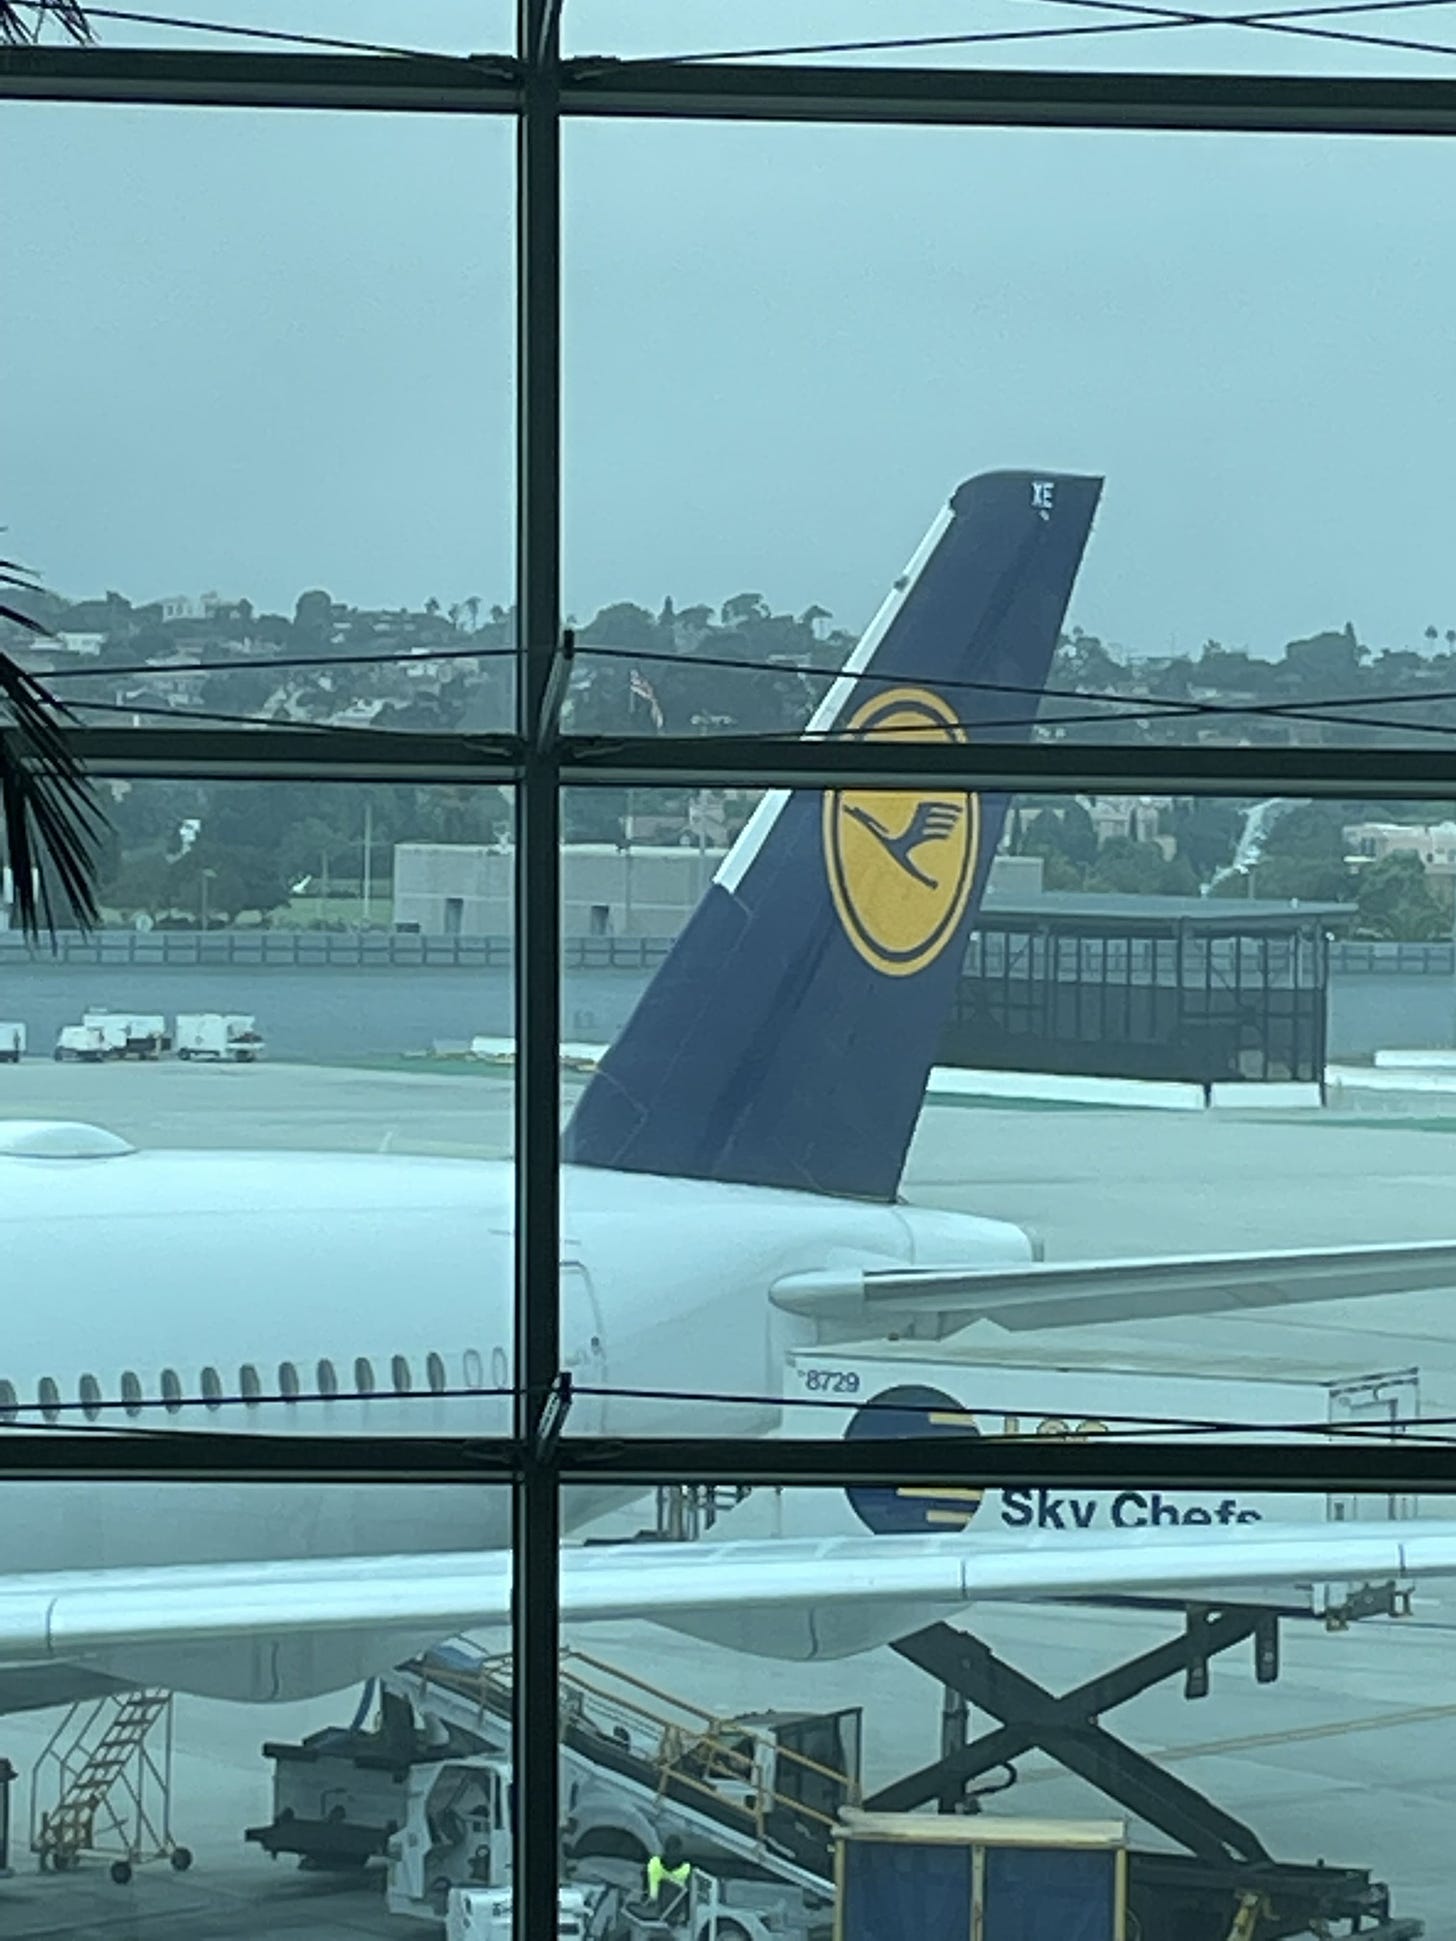 Lufthansa A350 parked at San Diego airport